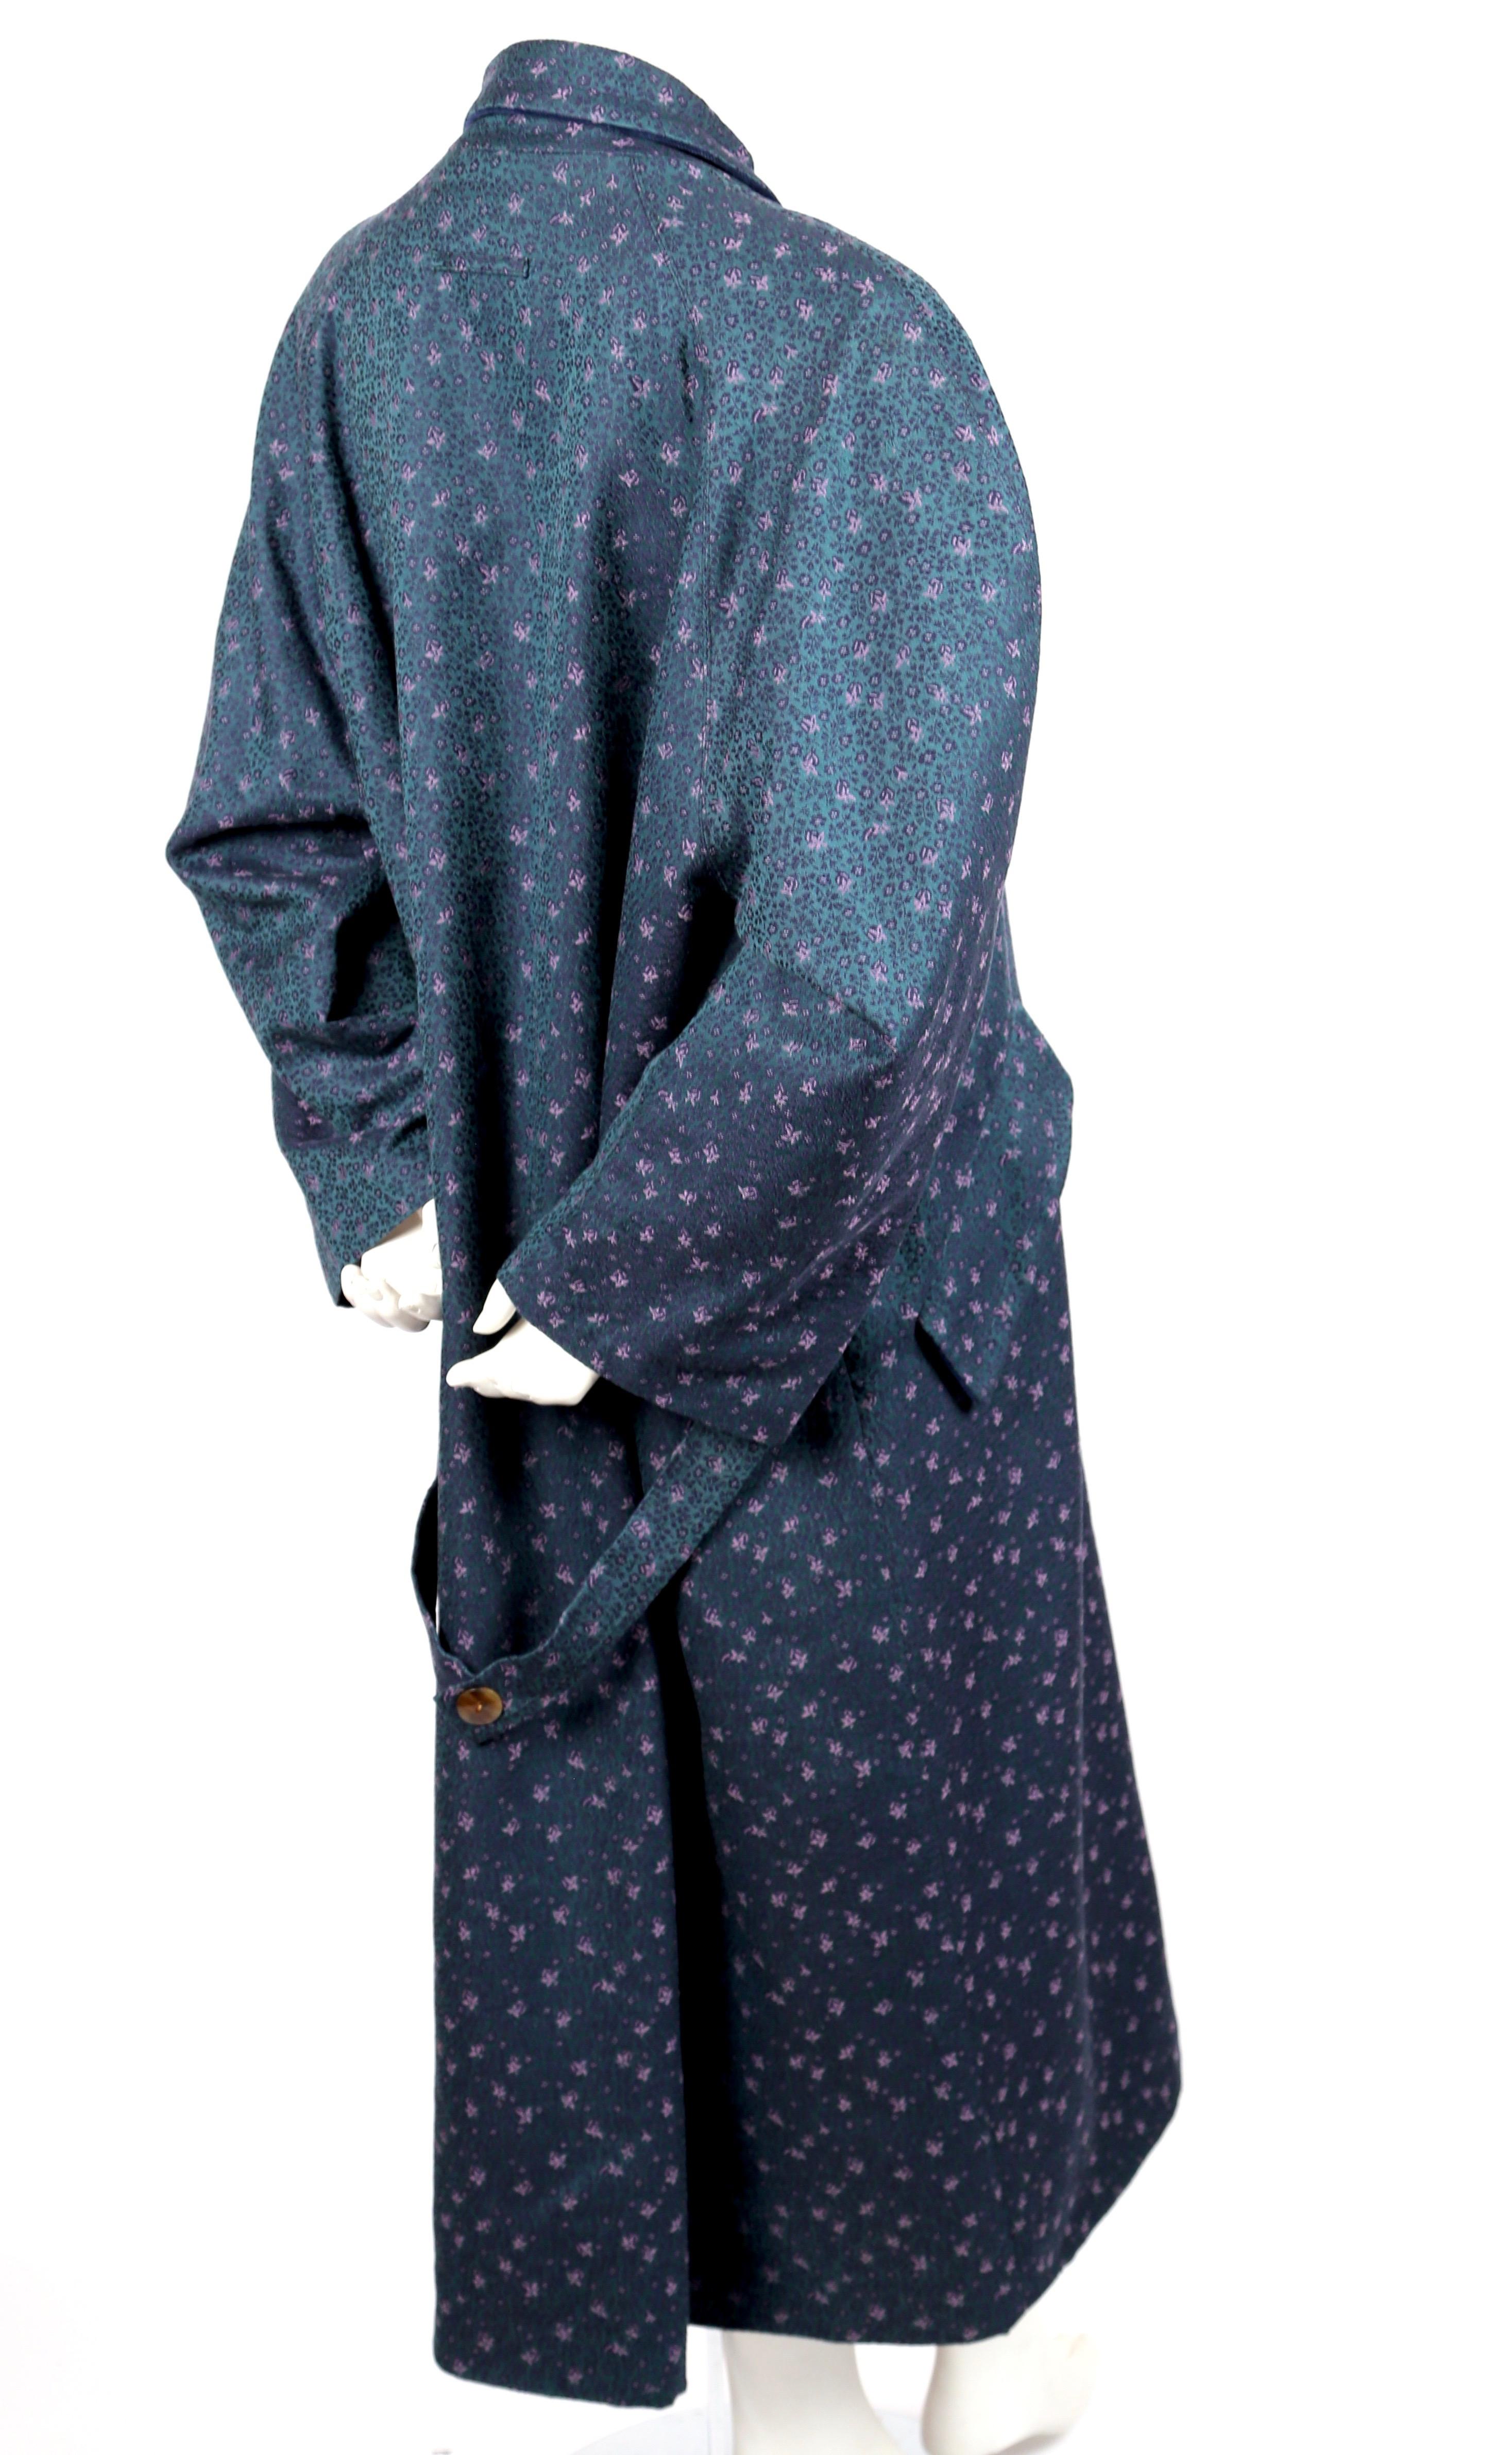 1985 JEAN PAUL GAULTIER for GIBO oversized floral jacquard RUNWAY coat In Good Condition For Sale In San Fransisco, CA